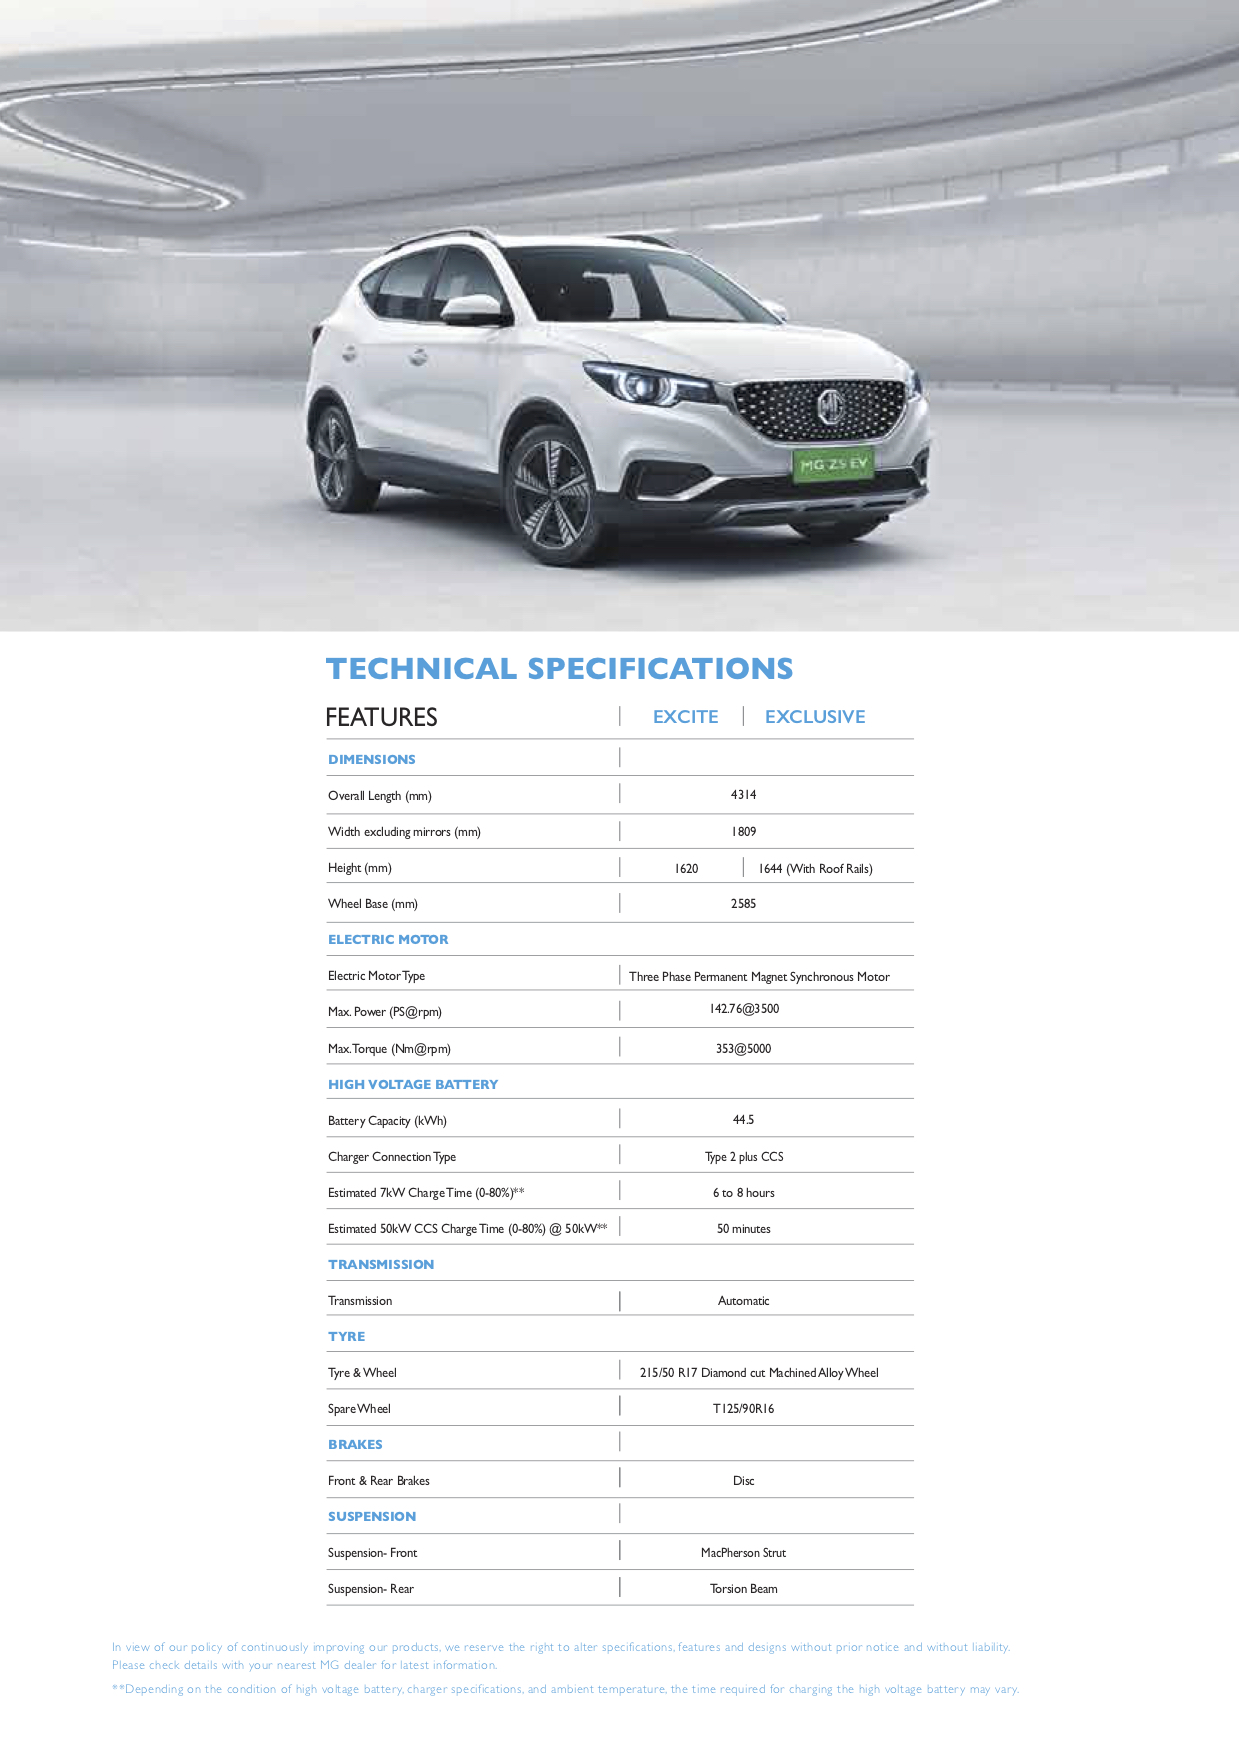 MG ZS tech specs, variant-wise features & charging addresses revealed